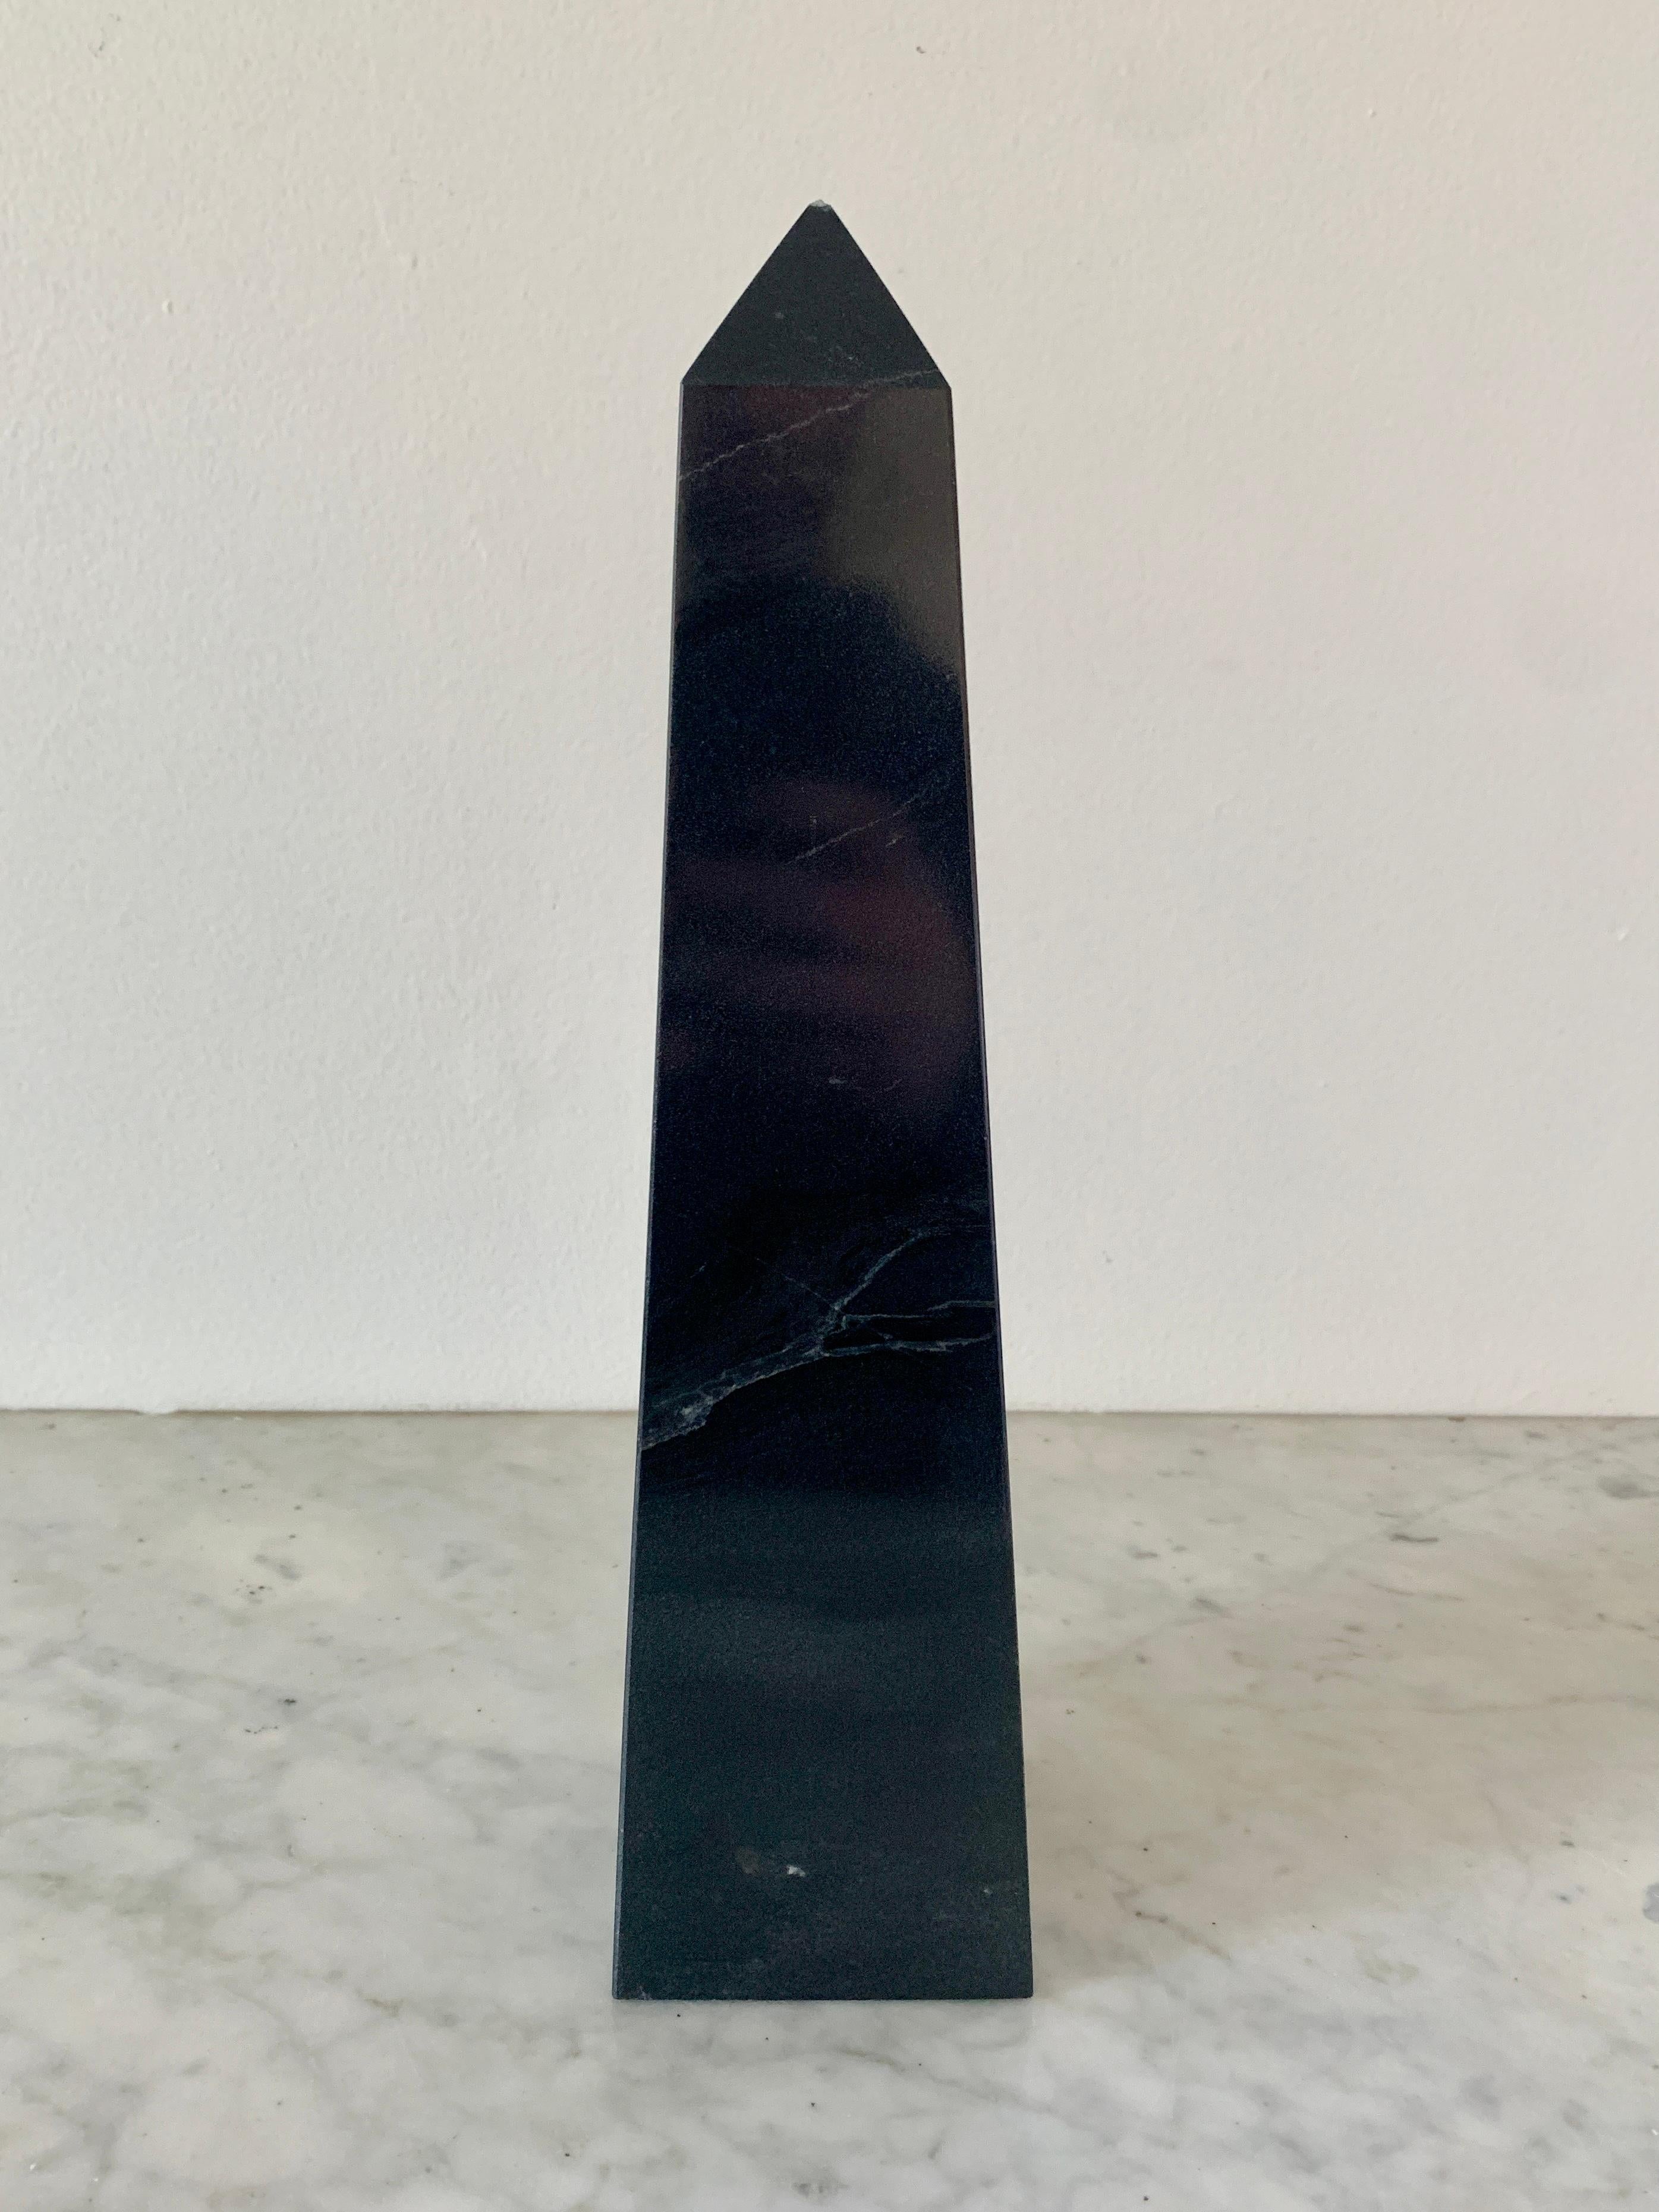 A stunning neoclassical style solid marble black & gray obelisk

Measures: 3